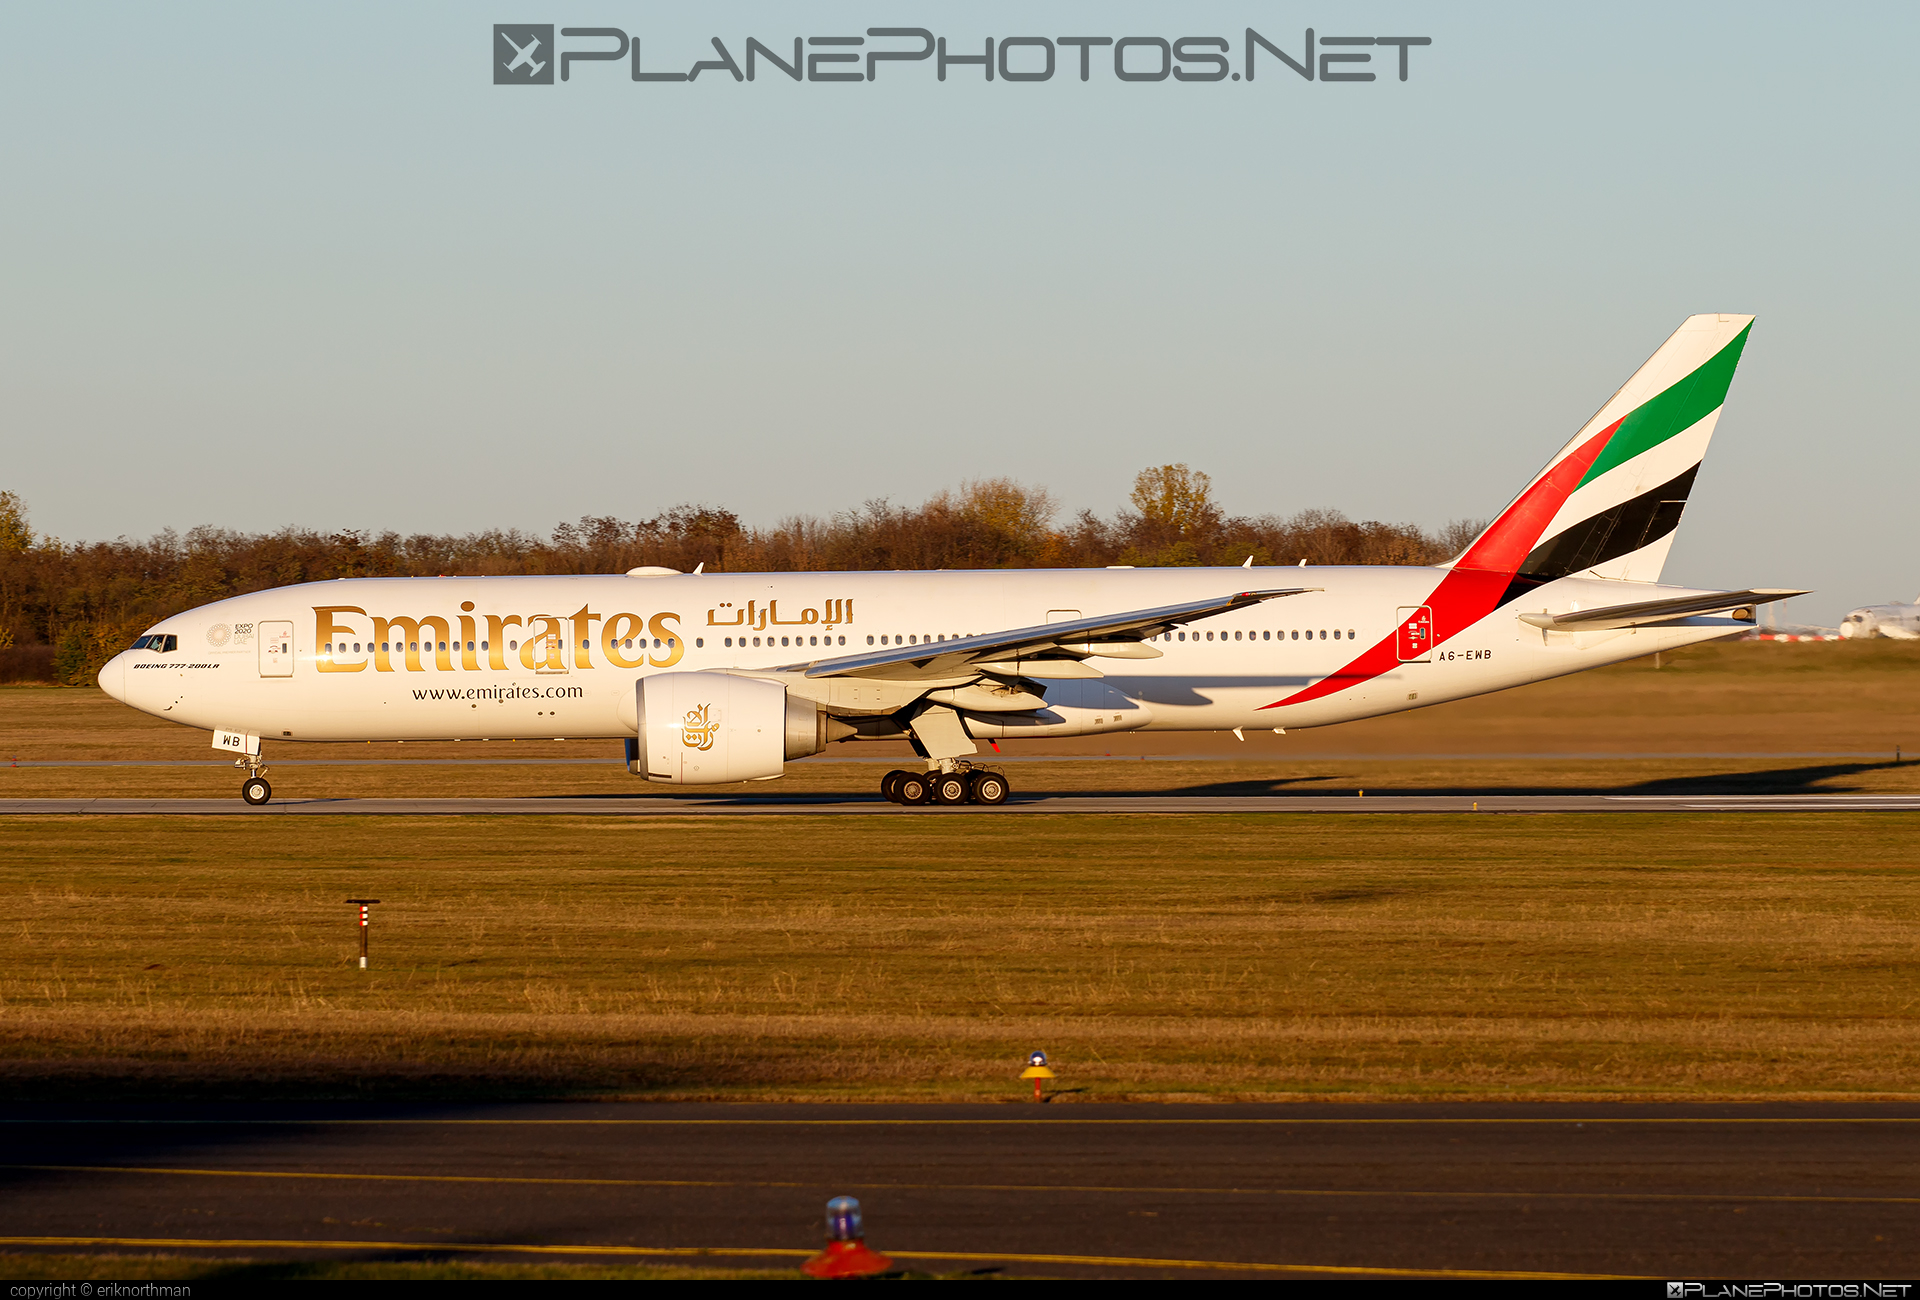 Boeing 777-200LR - A6-EWB operated by Emirates #b777 #b777lr #boeing #boeing777 #emirates #tripleseven